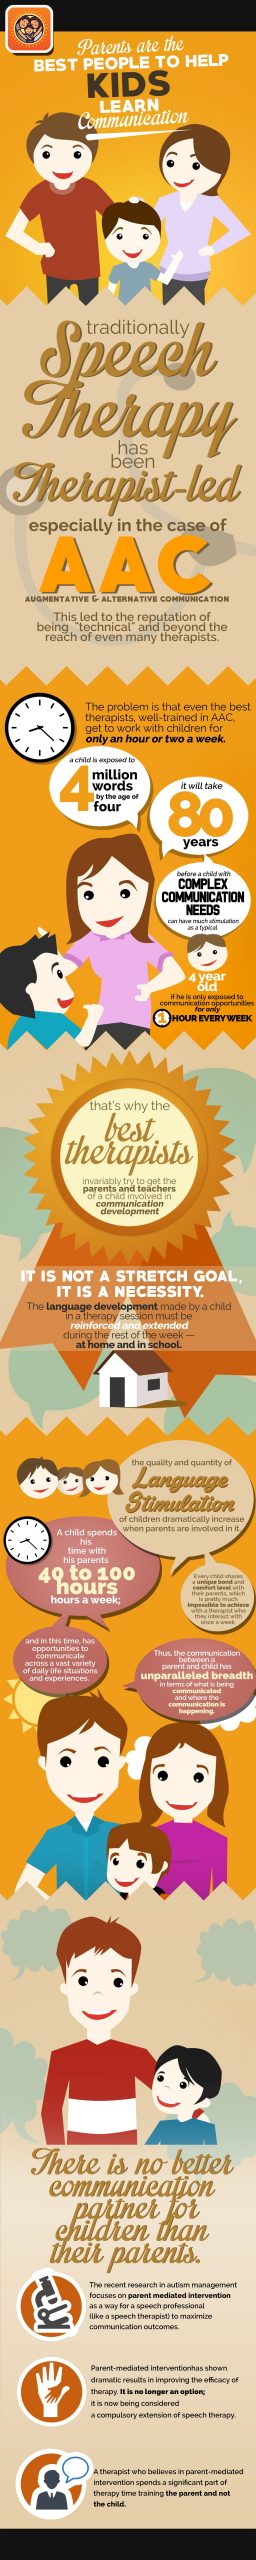 Infographic explaining why parents the best People to Enable Children Learn Communication